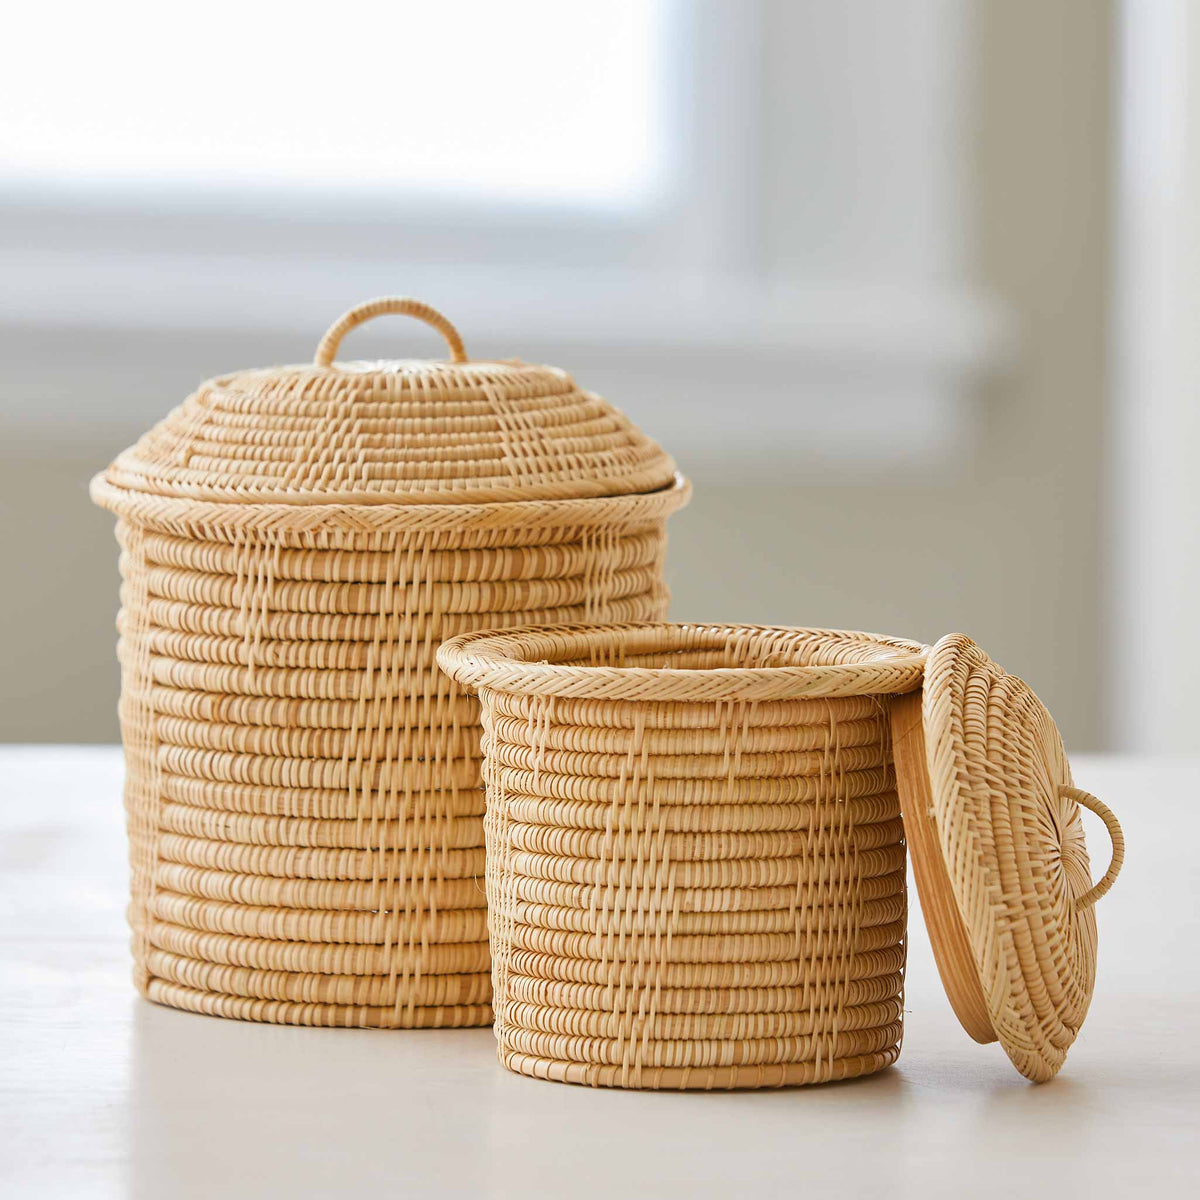 HANDWOVEN CANISTERS